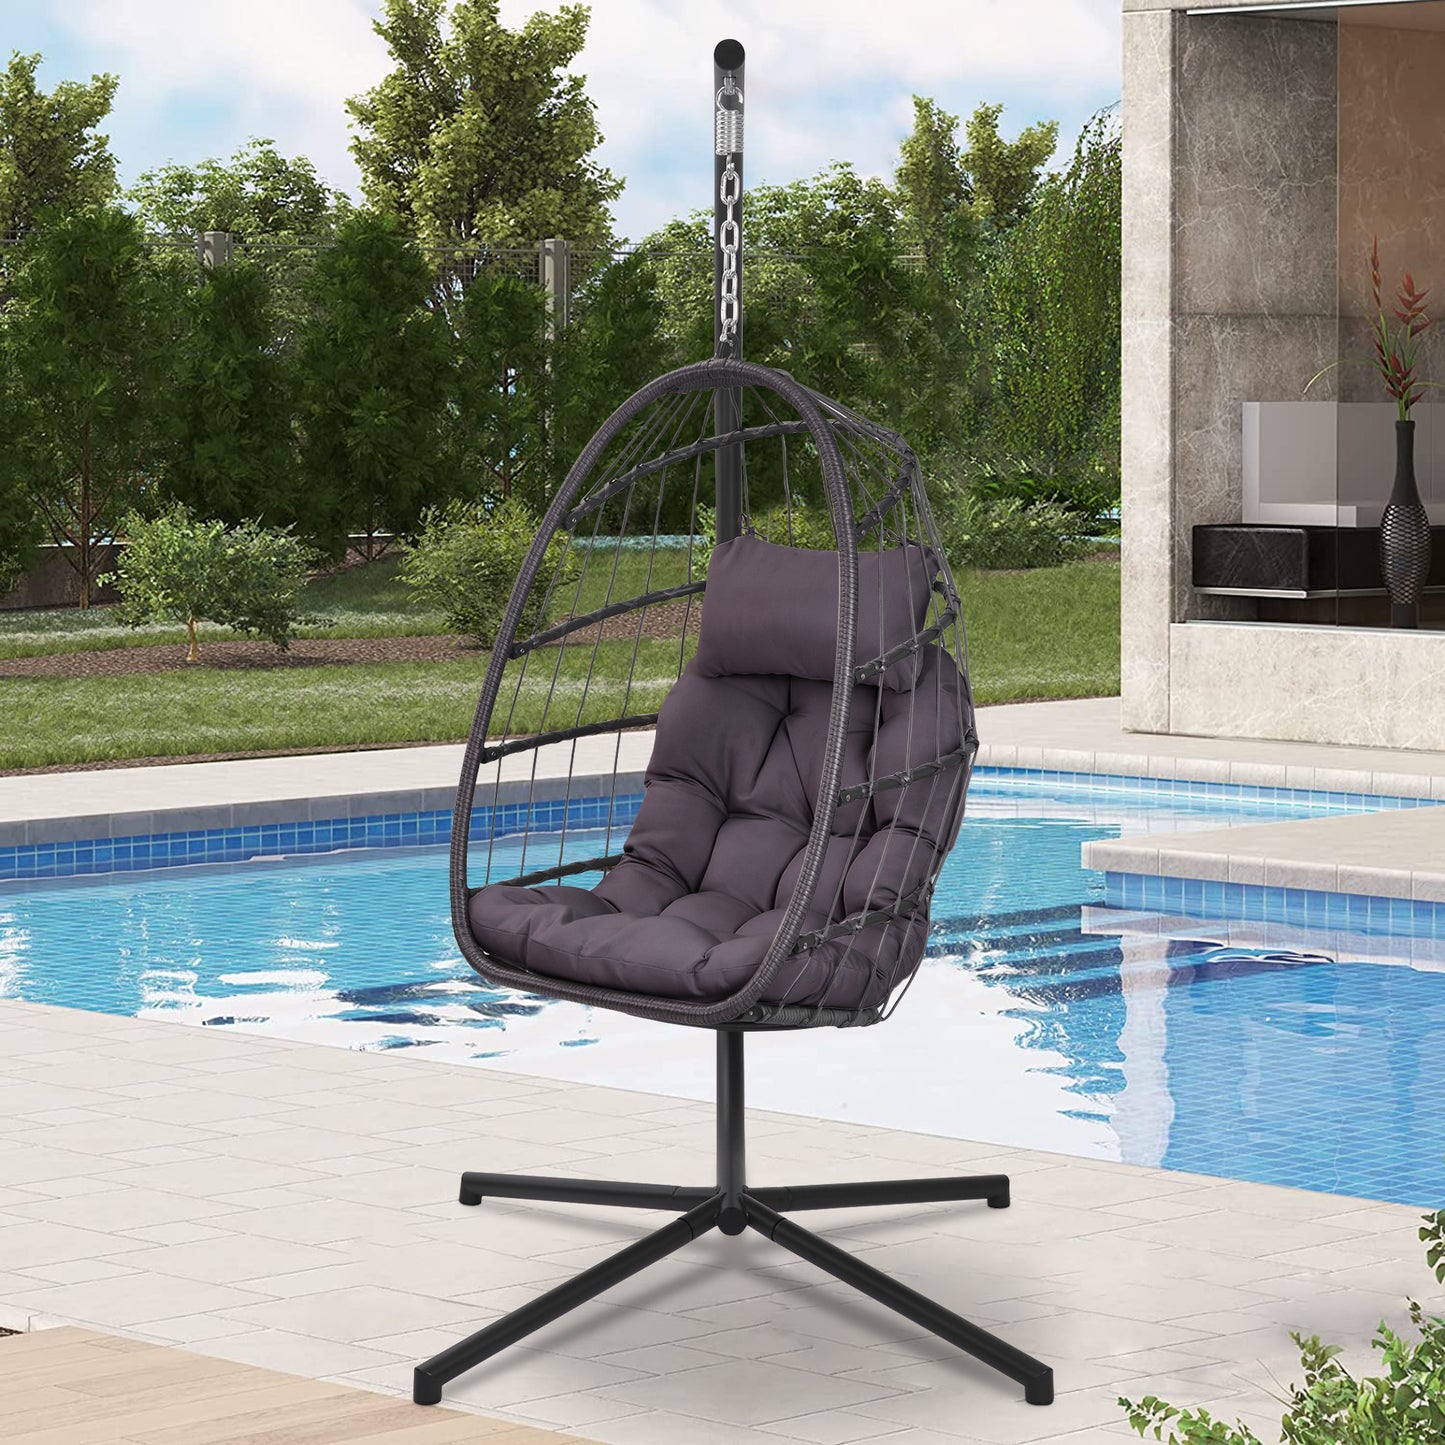 SYNGAR Hanging Egg Chair with Stand for Indoor/Outdoor, Patio Wicker Swing Chair with Seat Cushion & Pillow, Heavy Duty Hammock Basket Chair for Bedroom, Porch, Balcony, 300 lbs Capacity, Y025